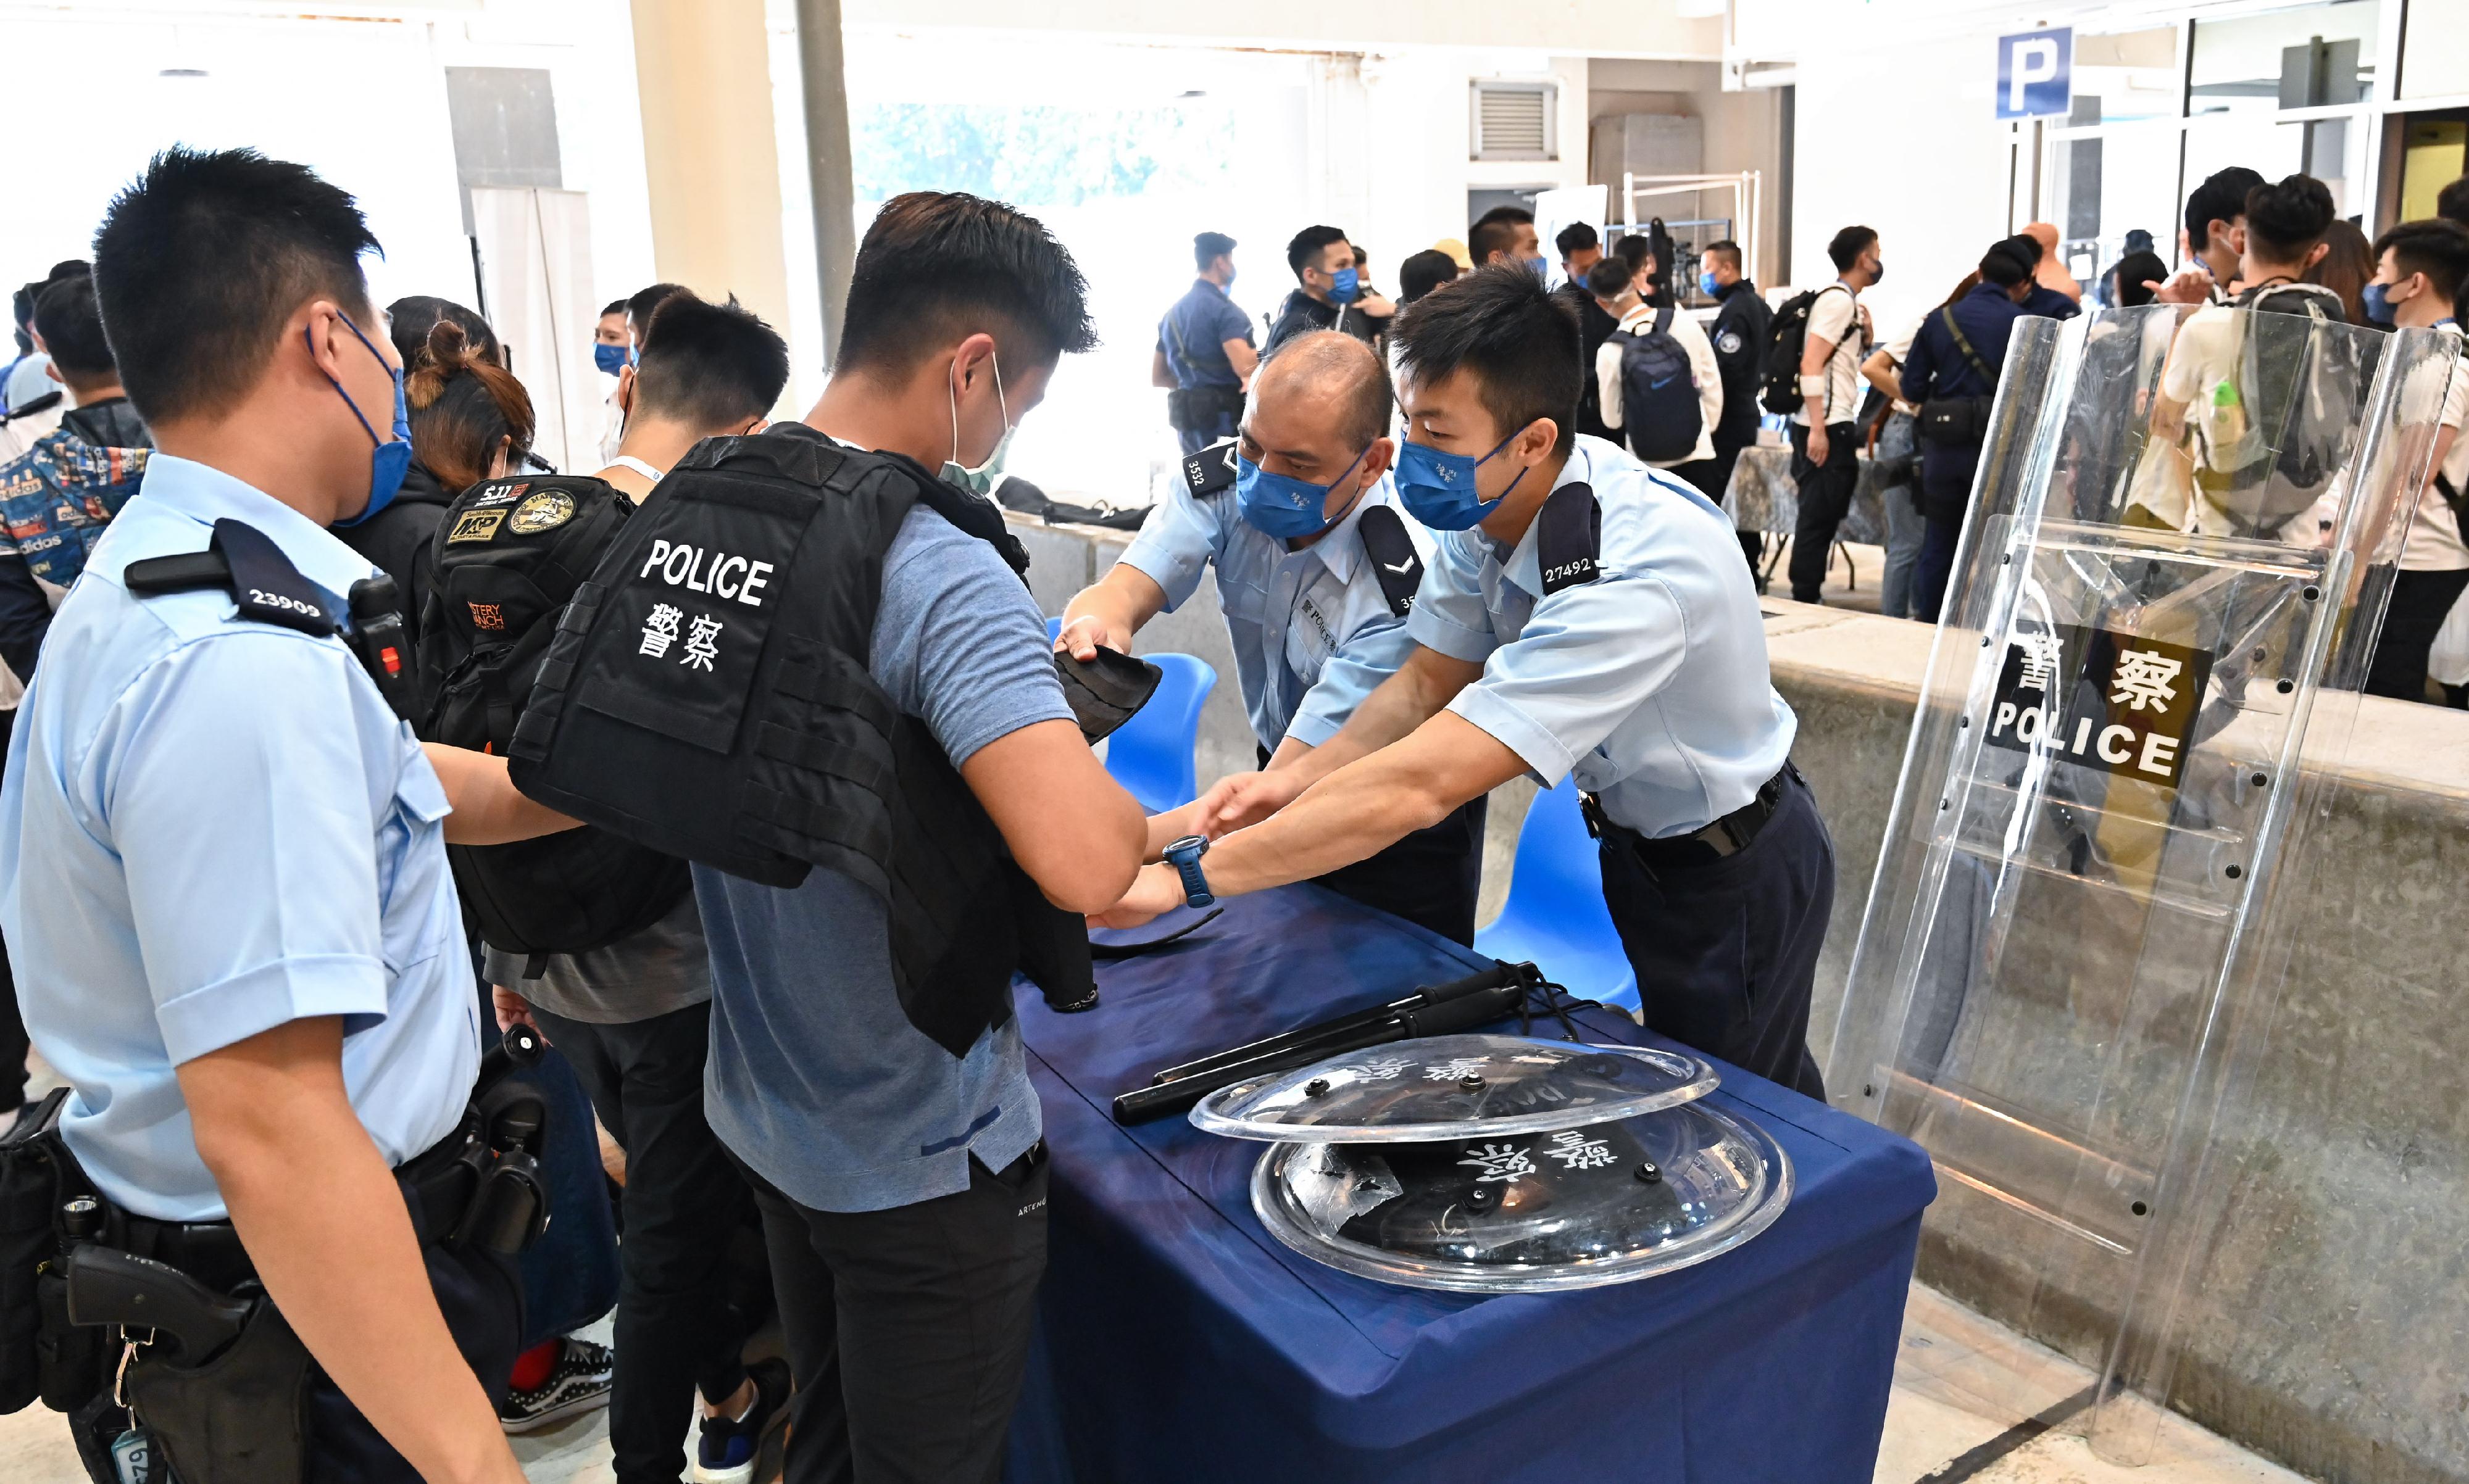 The Hong Kong Police Force today (November 20) organised the Police Recruitment Experience and Assessment Day at the Hong Kong Police College. Photo shows officers from the Patrol Sub-Unit introducing their equipment to participants.